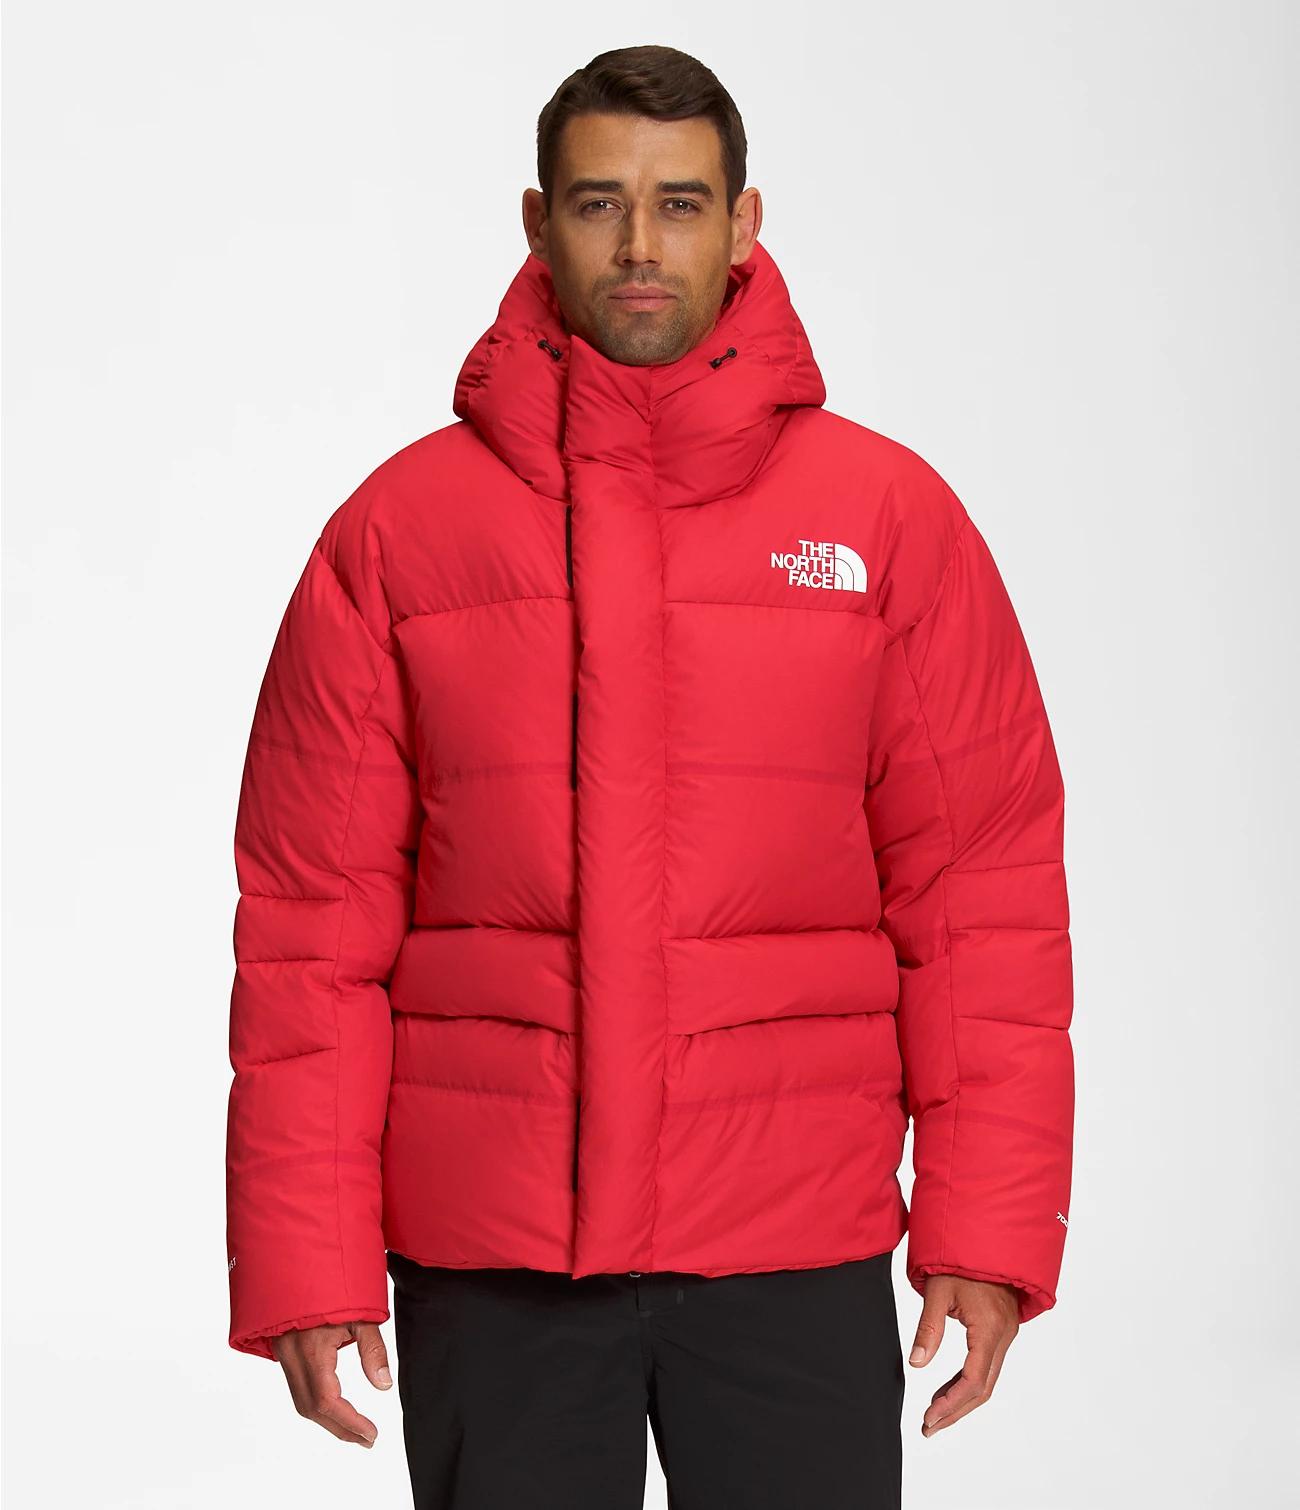 Men’s RMST Himalayan Parka by THE NORTH FACE | jellibeans